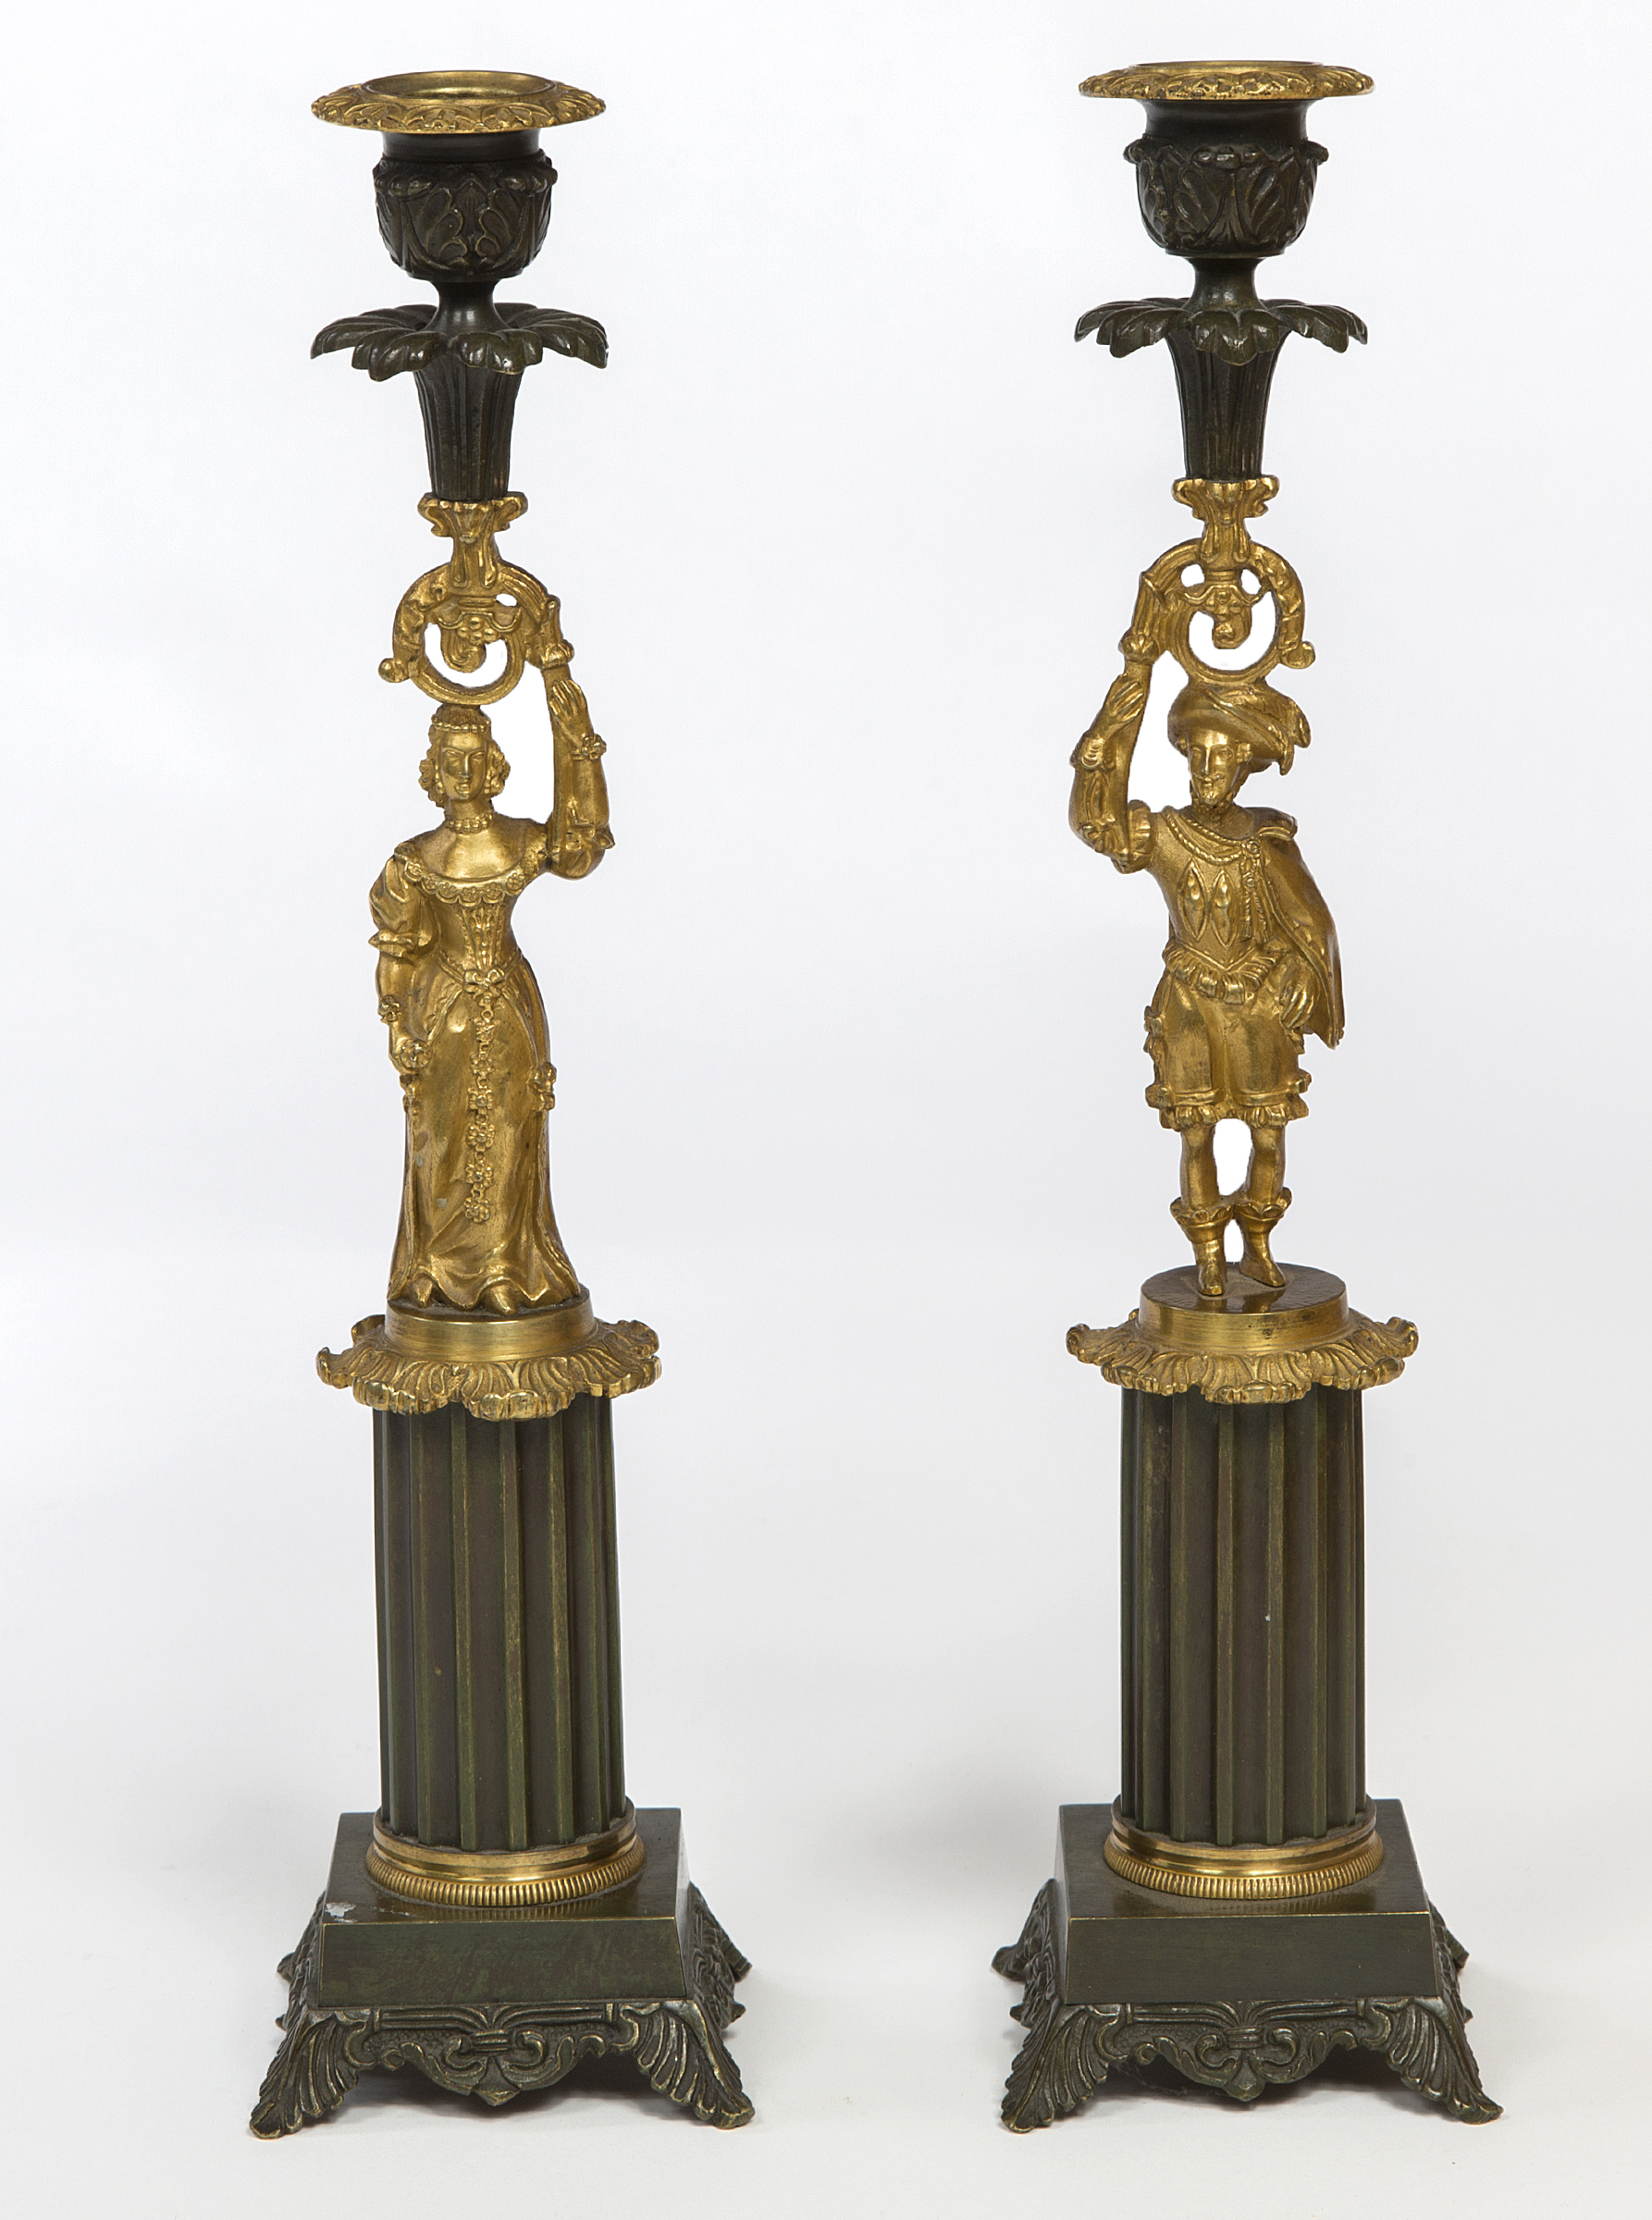 A VERY ATTRACTIVE PAIR OF BRONZE AND GILT BRONZE FIGURAL CANDLESTICKS,